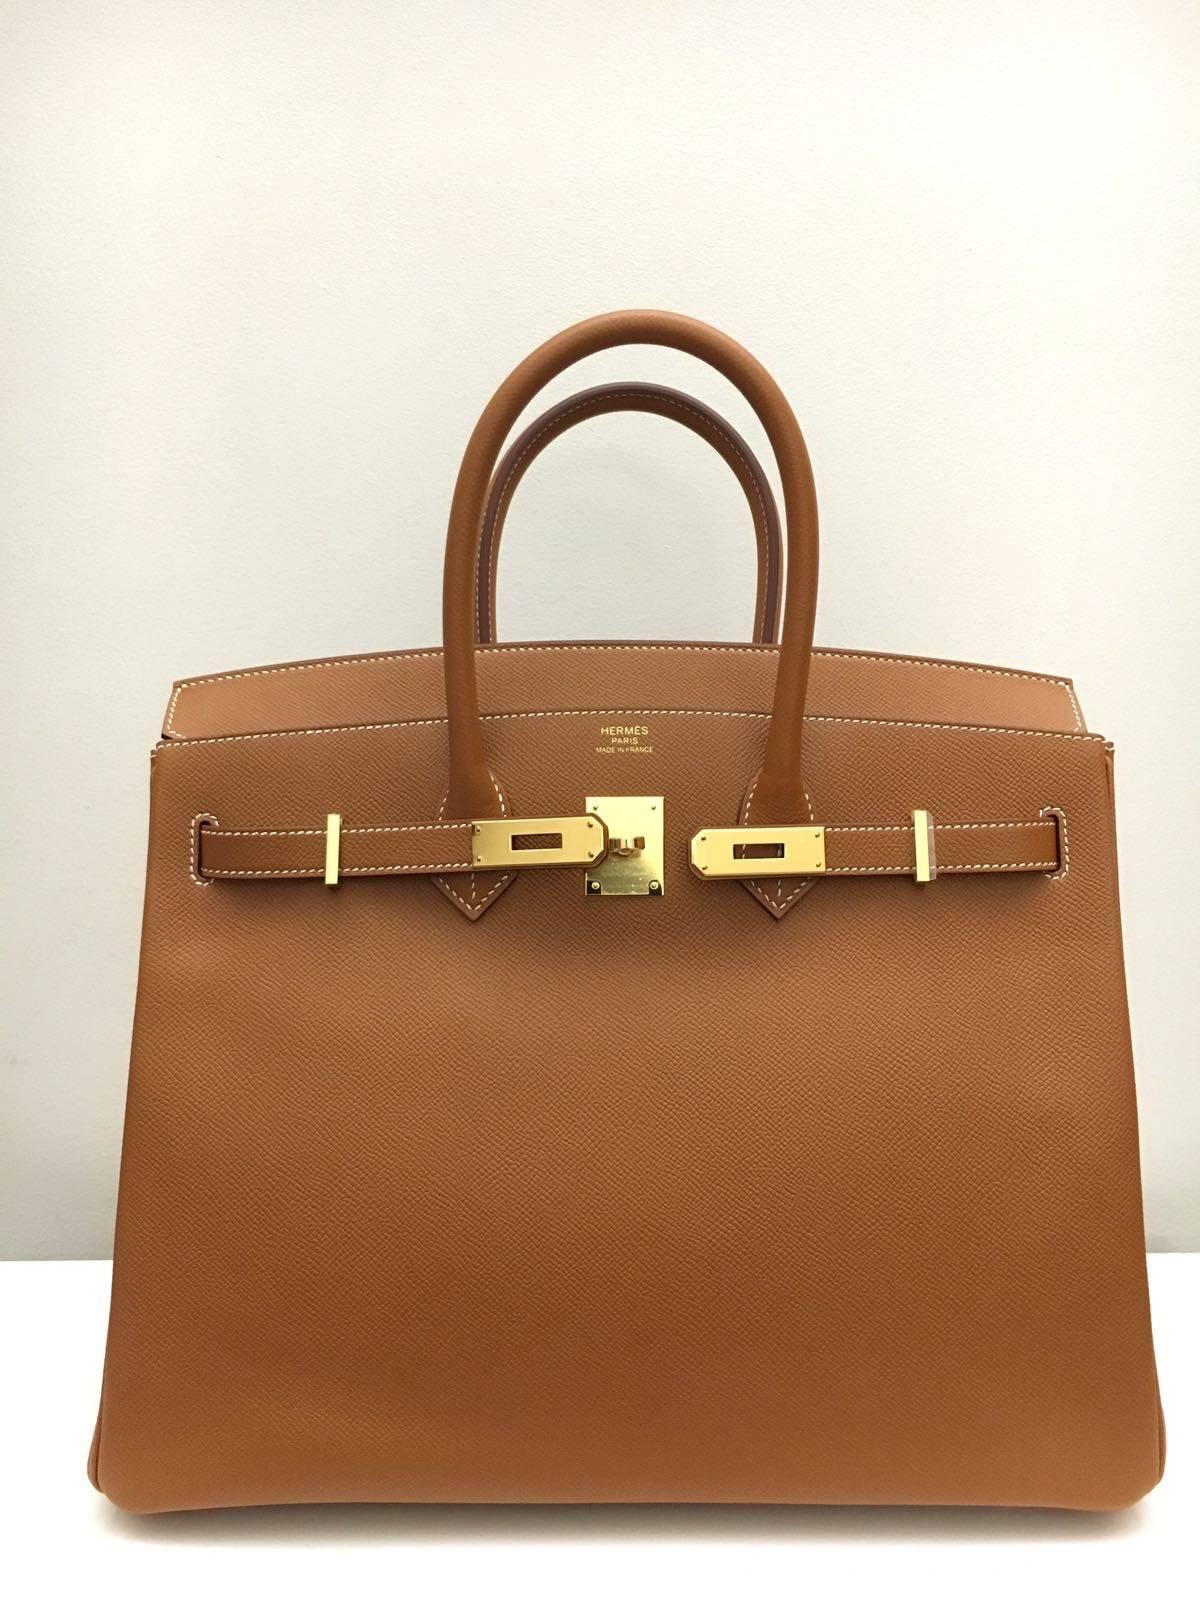 Hermes 
Birkin Size 35
Epsom Leather 
Colour Camel Gold 
Gold Hardware
Store fresh, comes with receipt and full set (dust bag, box...) 
Hydeparkfashion specializes in sourcing and delivering authentic luxury handbags, mainly Hermes, to clients